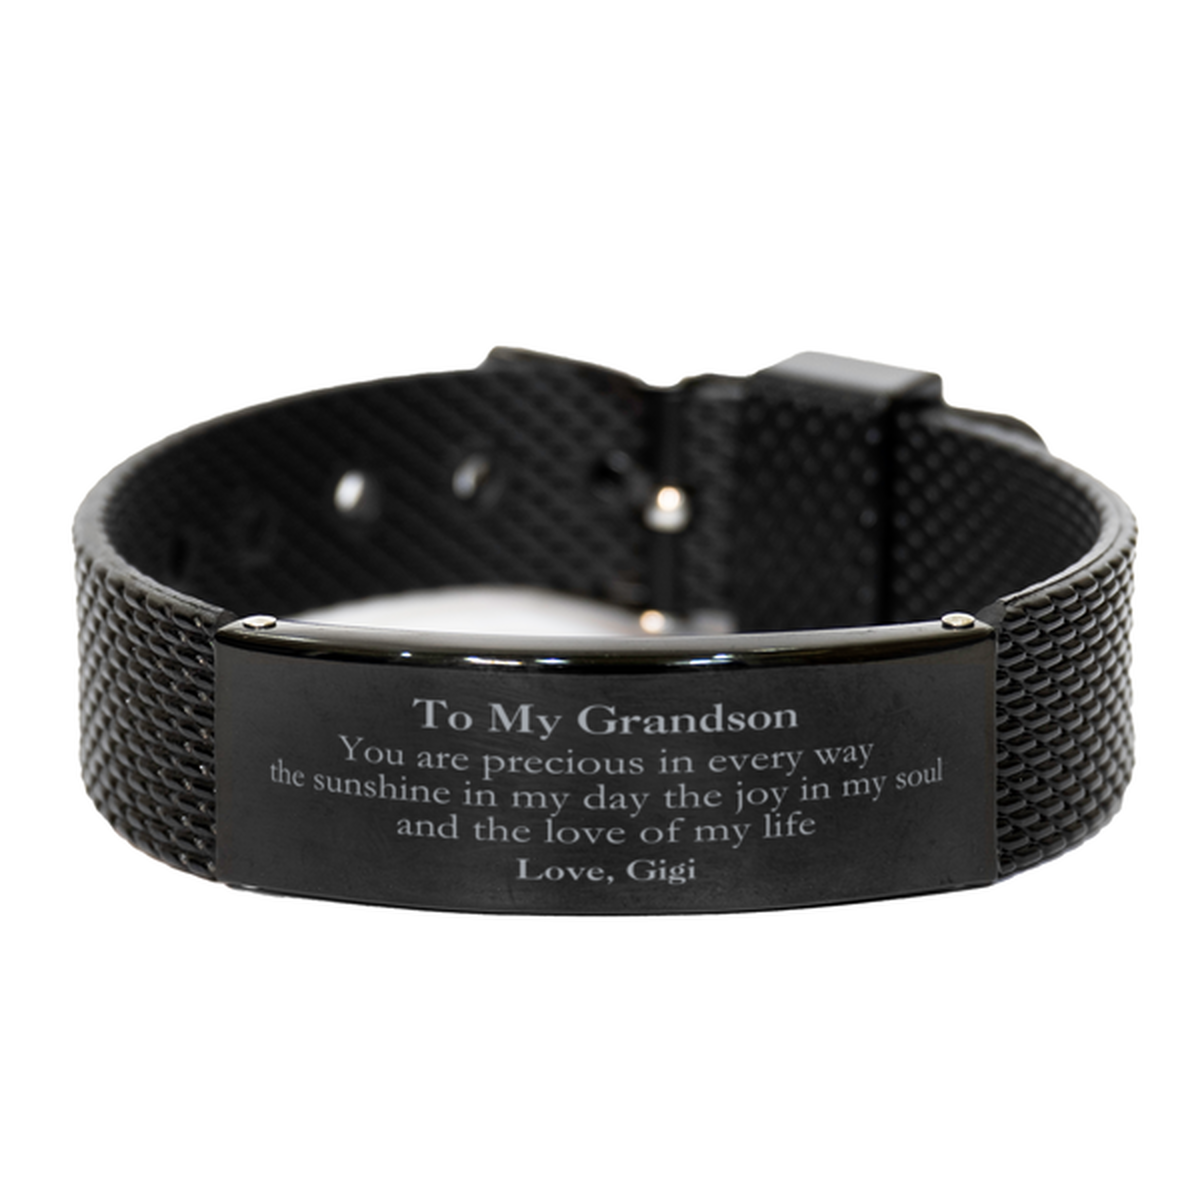 Graduation Gifts for Grandson Black Shark Mesh Bracelet Present from Gigi, Christmas Grandson Birthday Gifts Grandson You are precious in every way the sunshine in my day. Love, Gigi